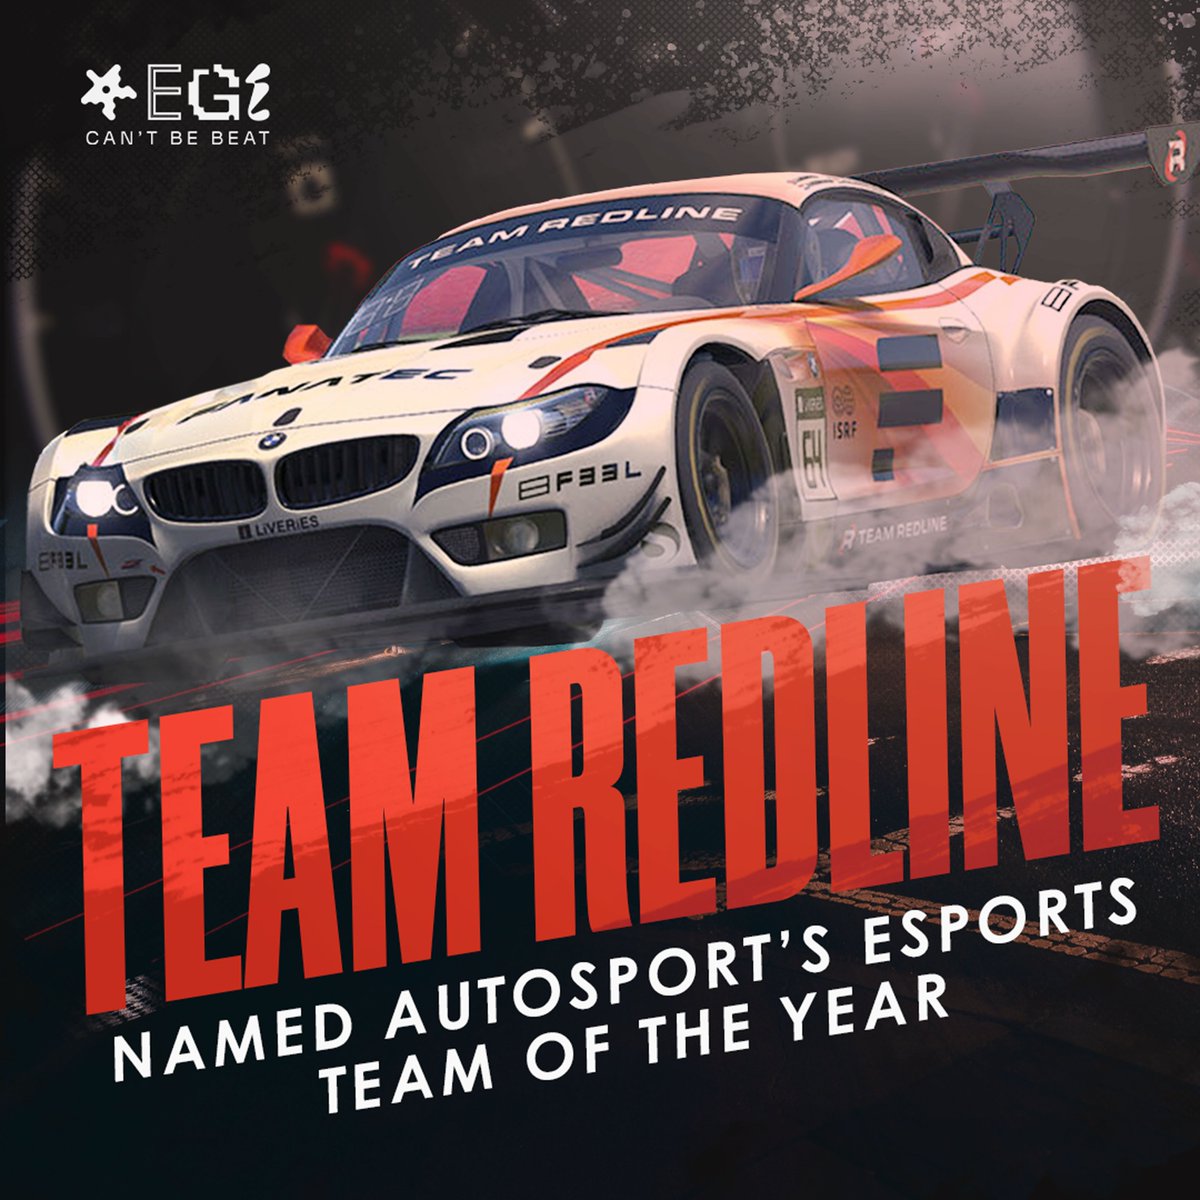 The award jury selected the 22-year-old sim racing team as the best in the past 12 months ahead of Veloce Esports, R8G Esports and Apex Racing.
.
.
#ebullient #gaming #esports #teams #gamechanger #organisation #greatergame